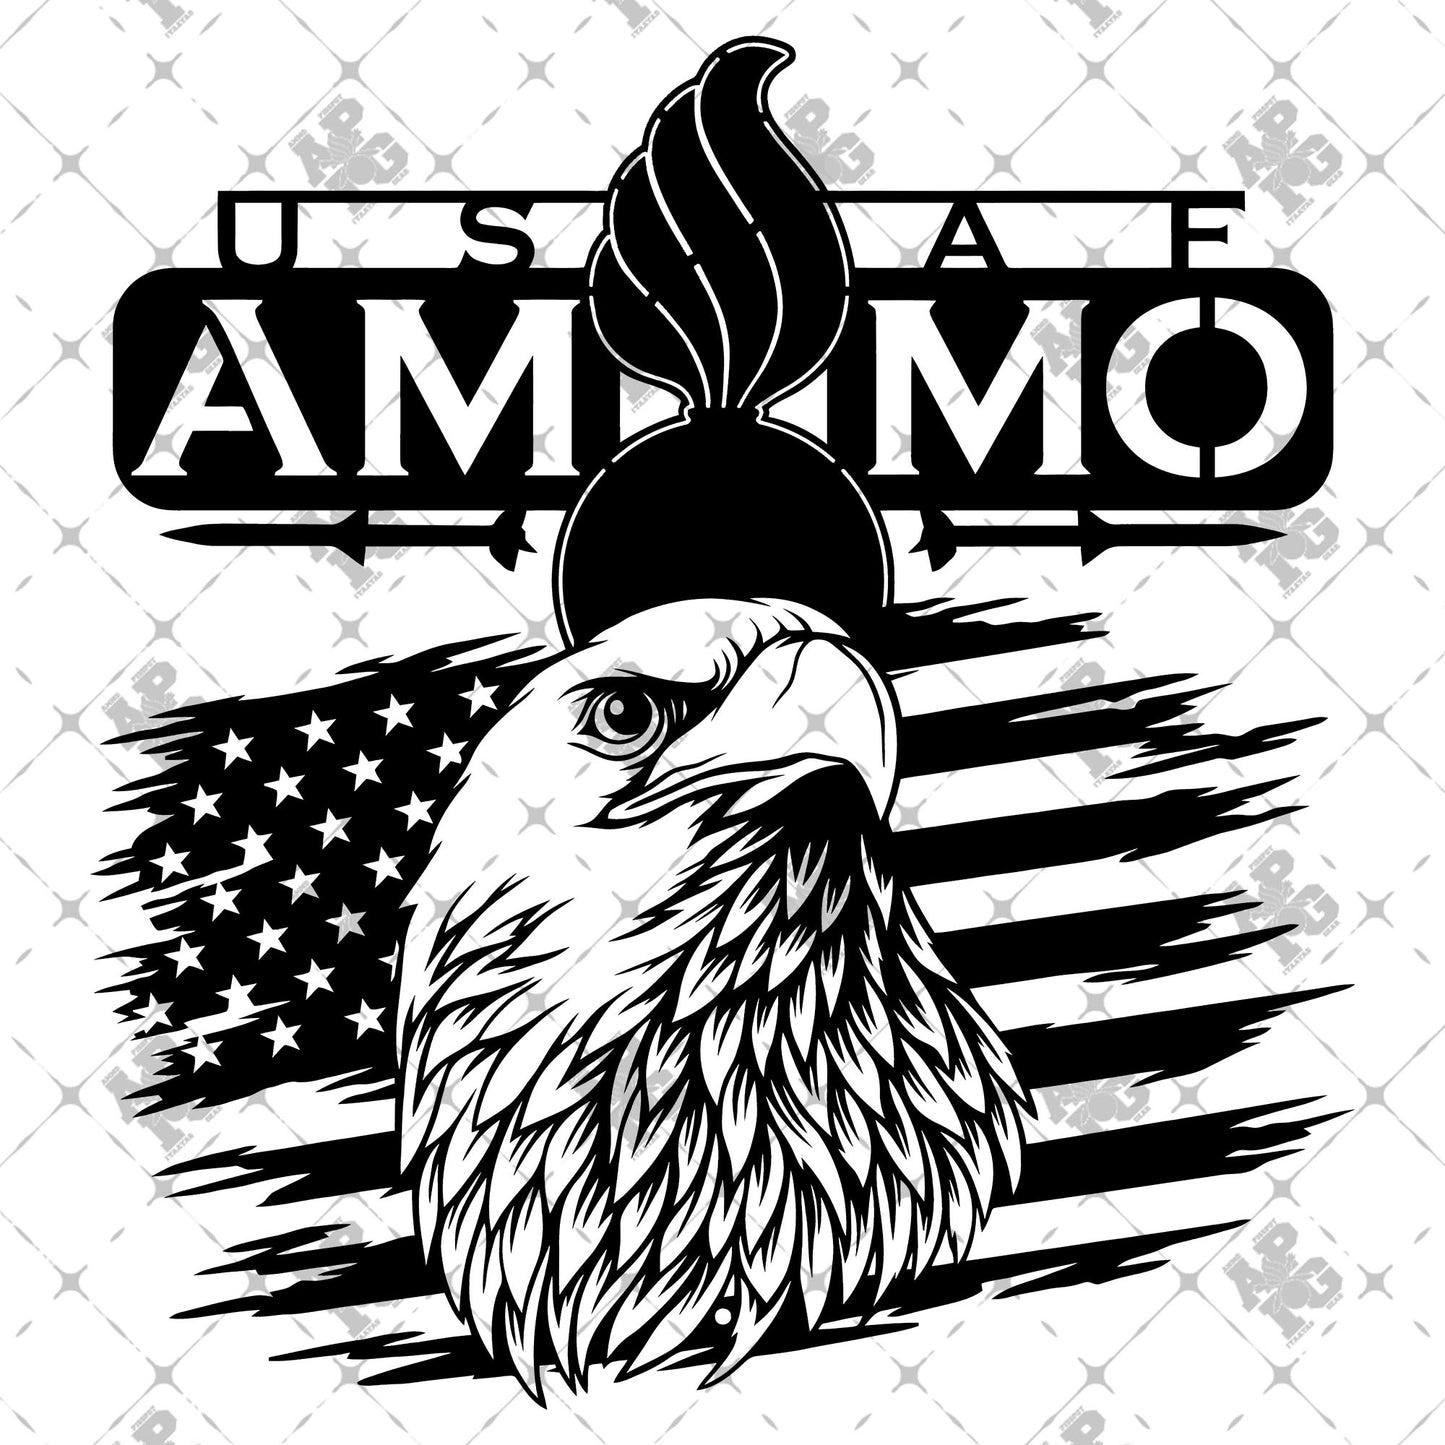 USAF AMMO Eagle Head American Flag Pisspot Missile Silhouettes Outdoor and Indoor Vinyl Kiss Cut Stickers